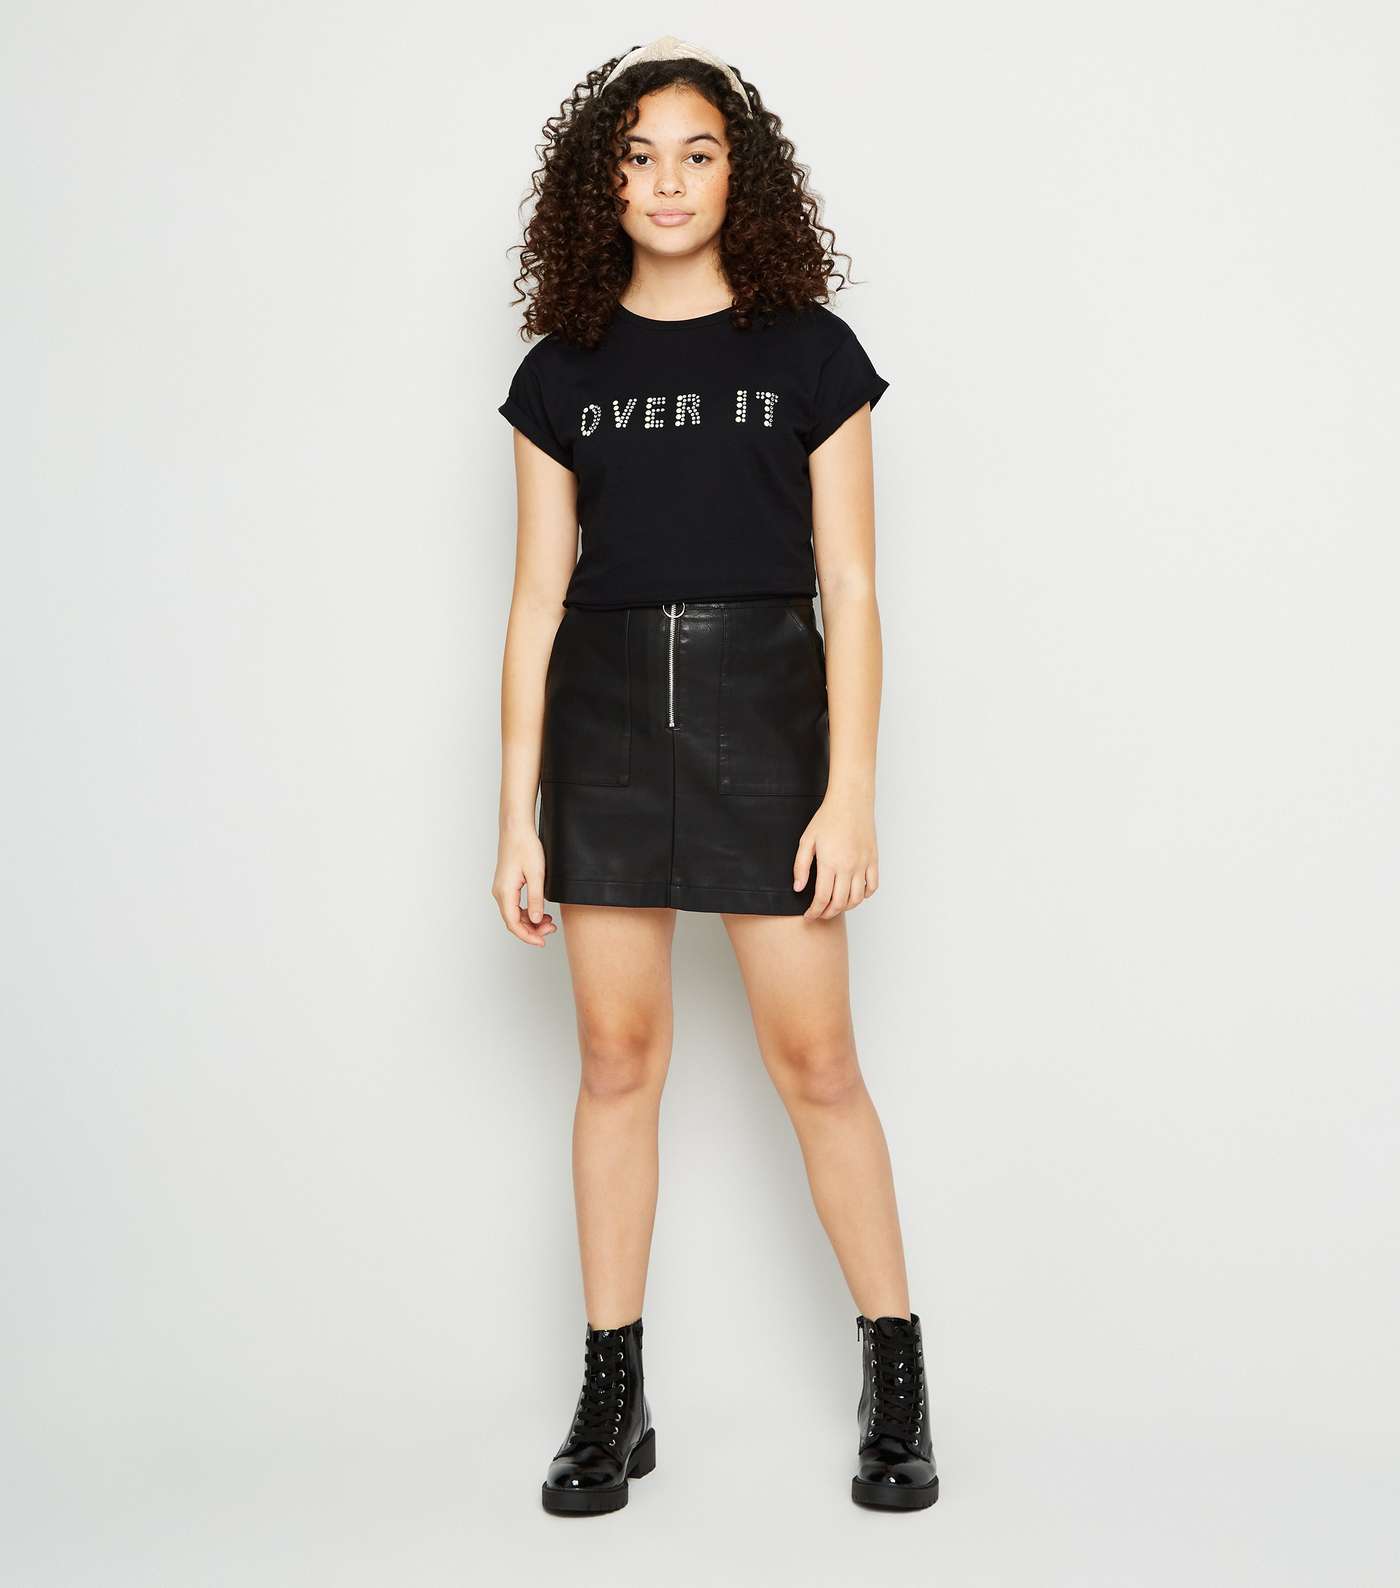 Girls Black Faux Pearl Over It Slogan T-Shirt Image 2